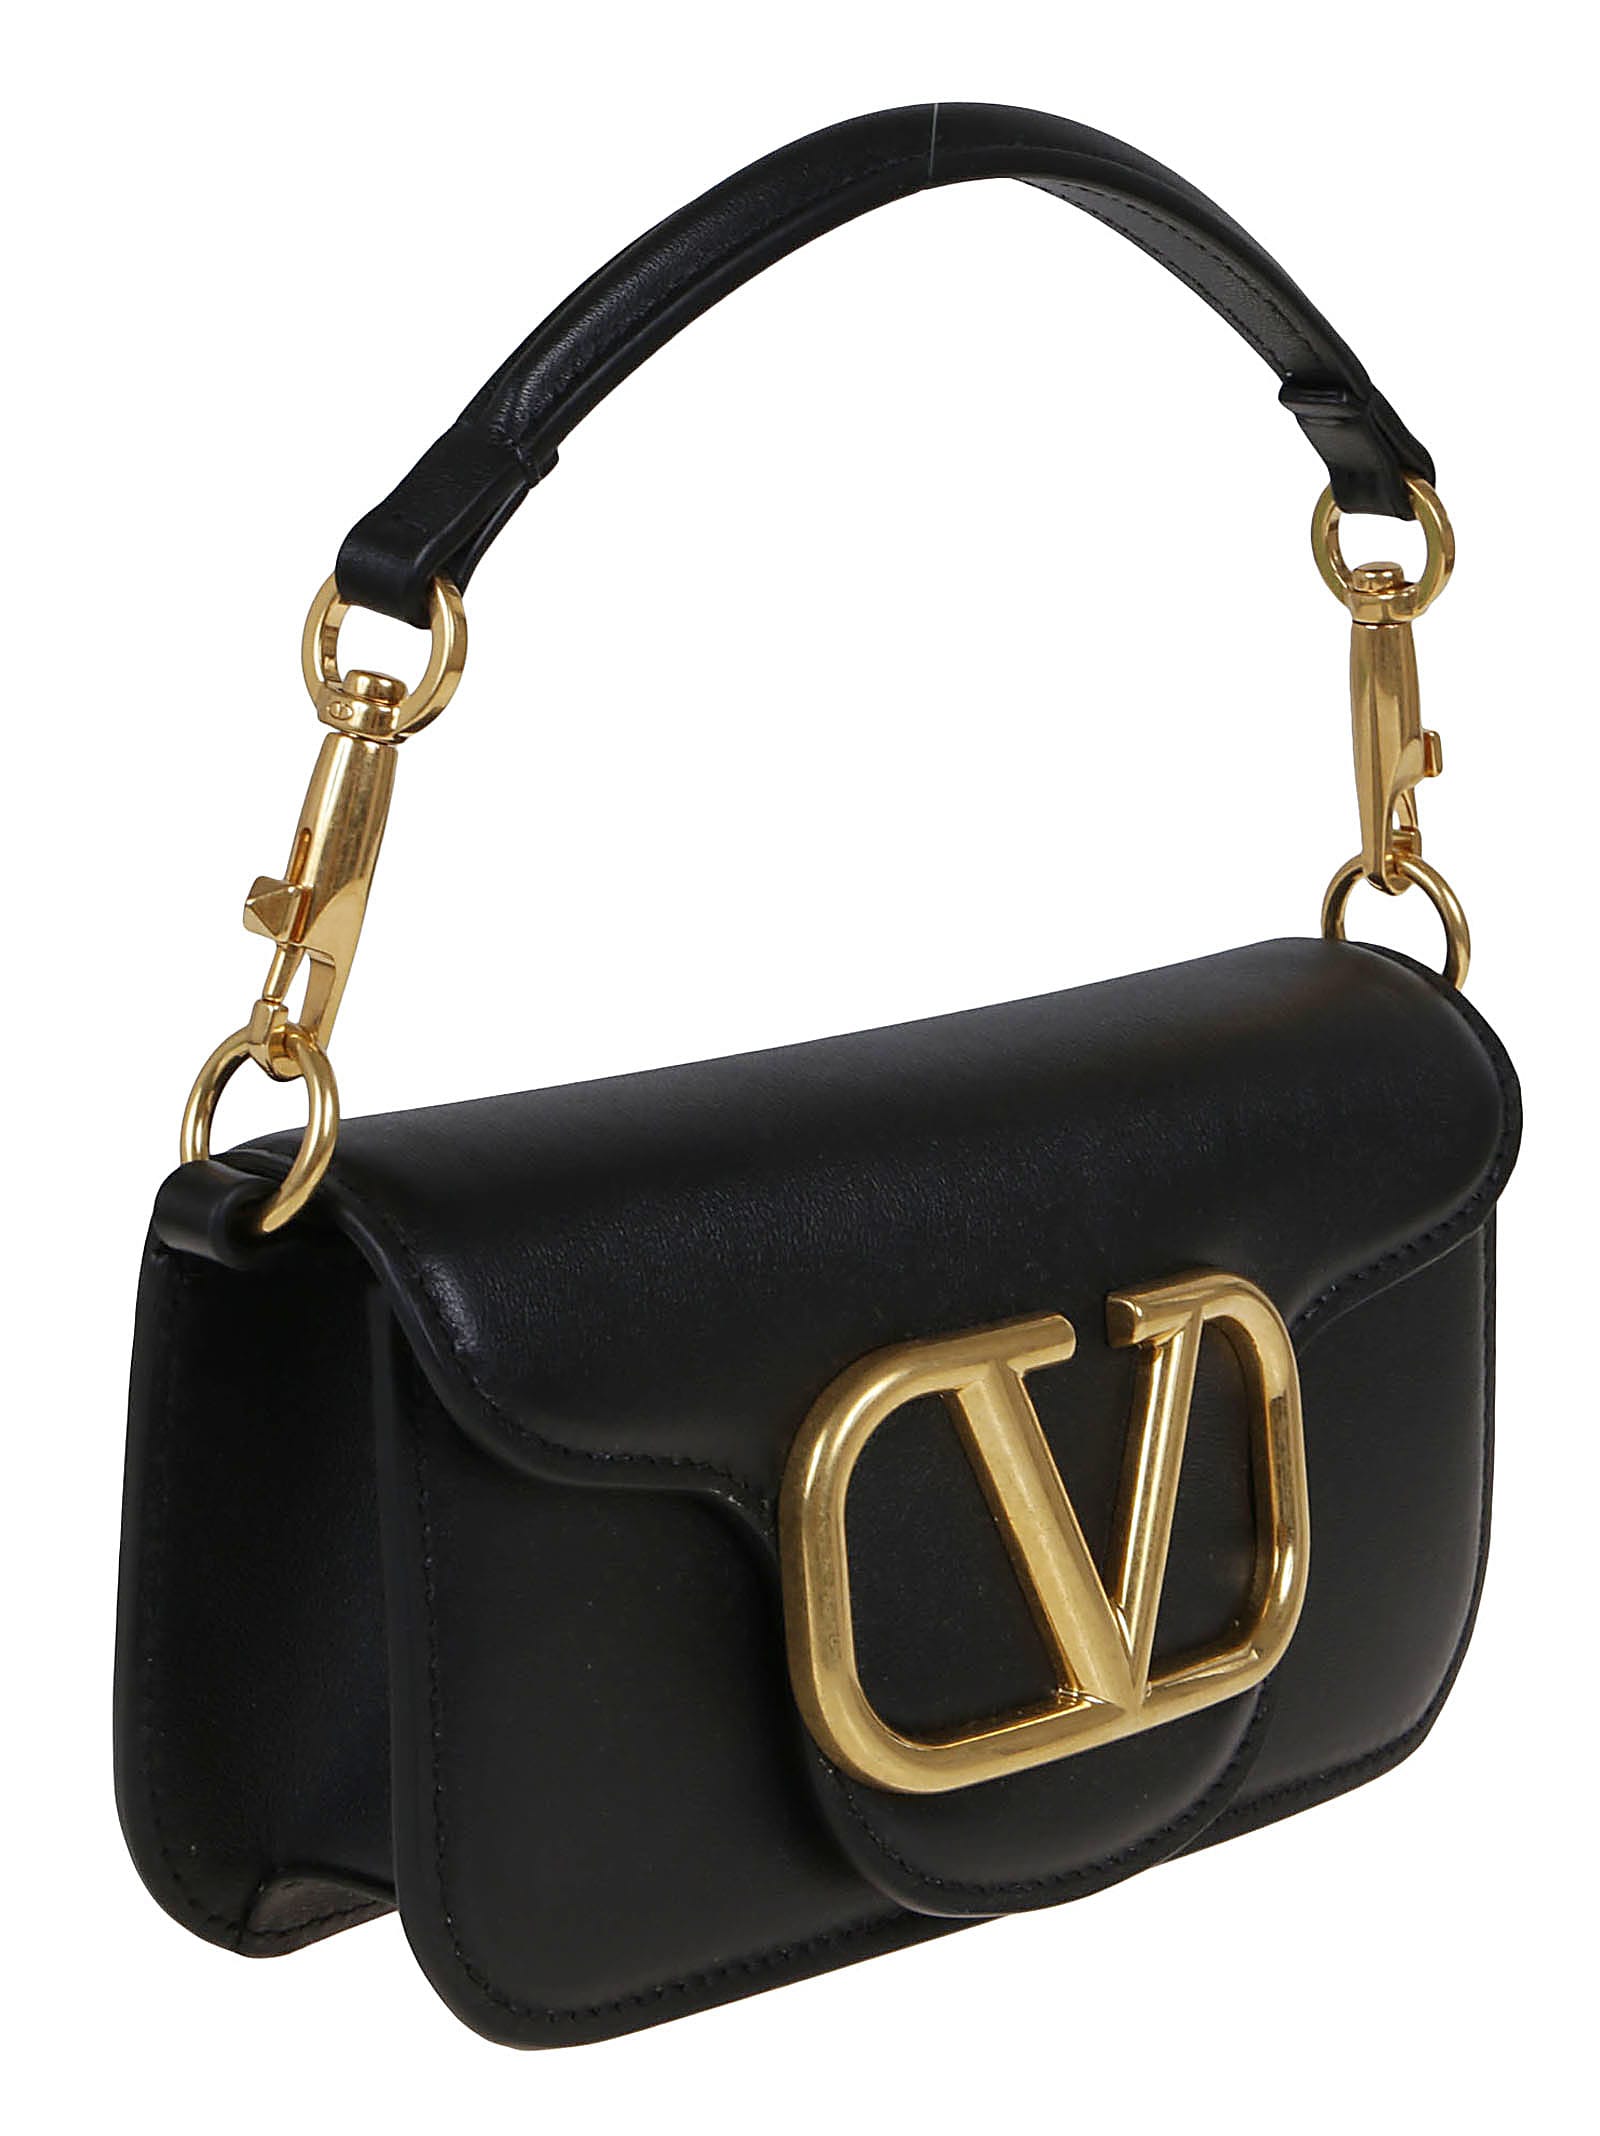 The New Iterations Of Valentino Loco Bag Are Season's Evening